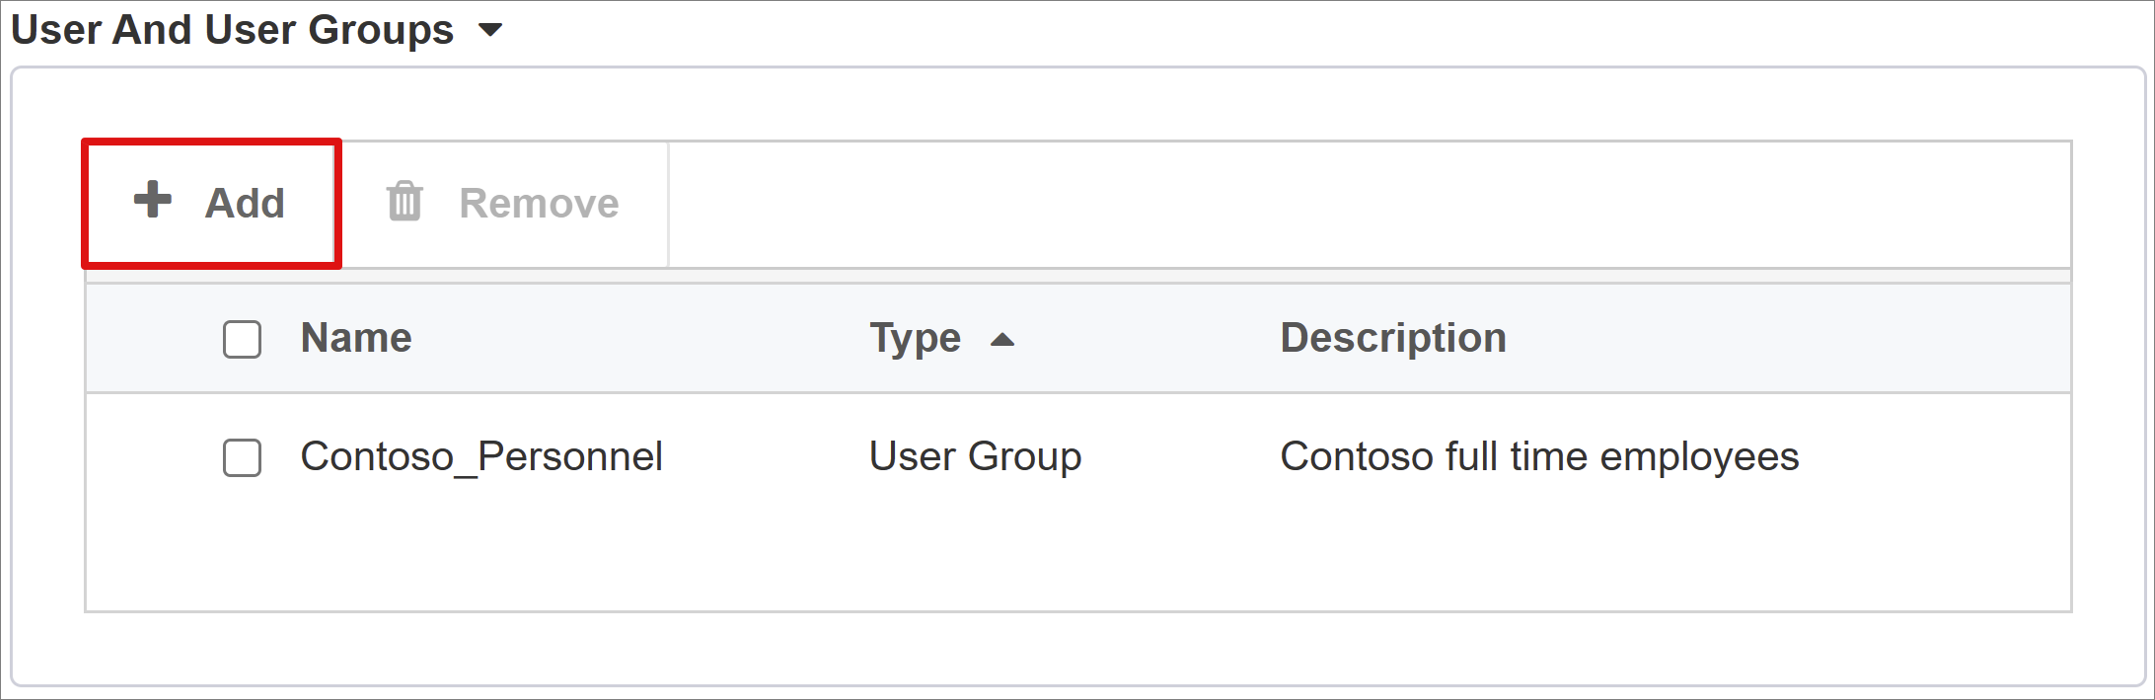 Screenshot of the Add button on User And User Groups.